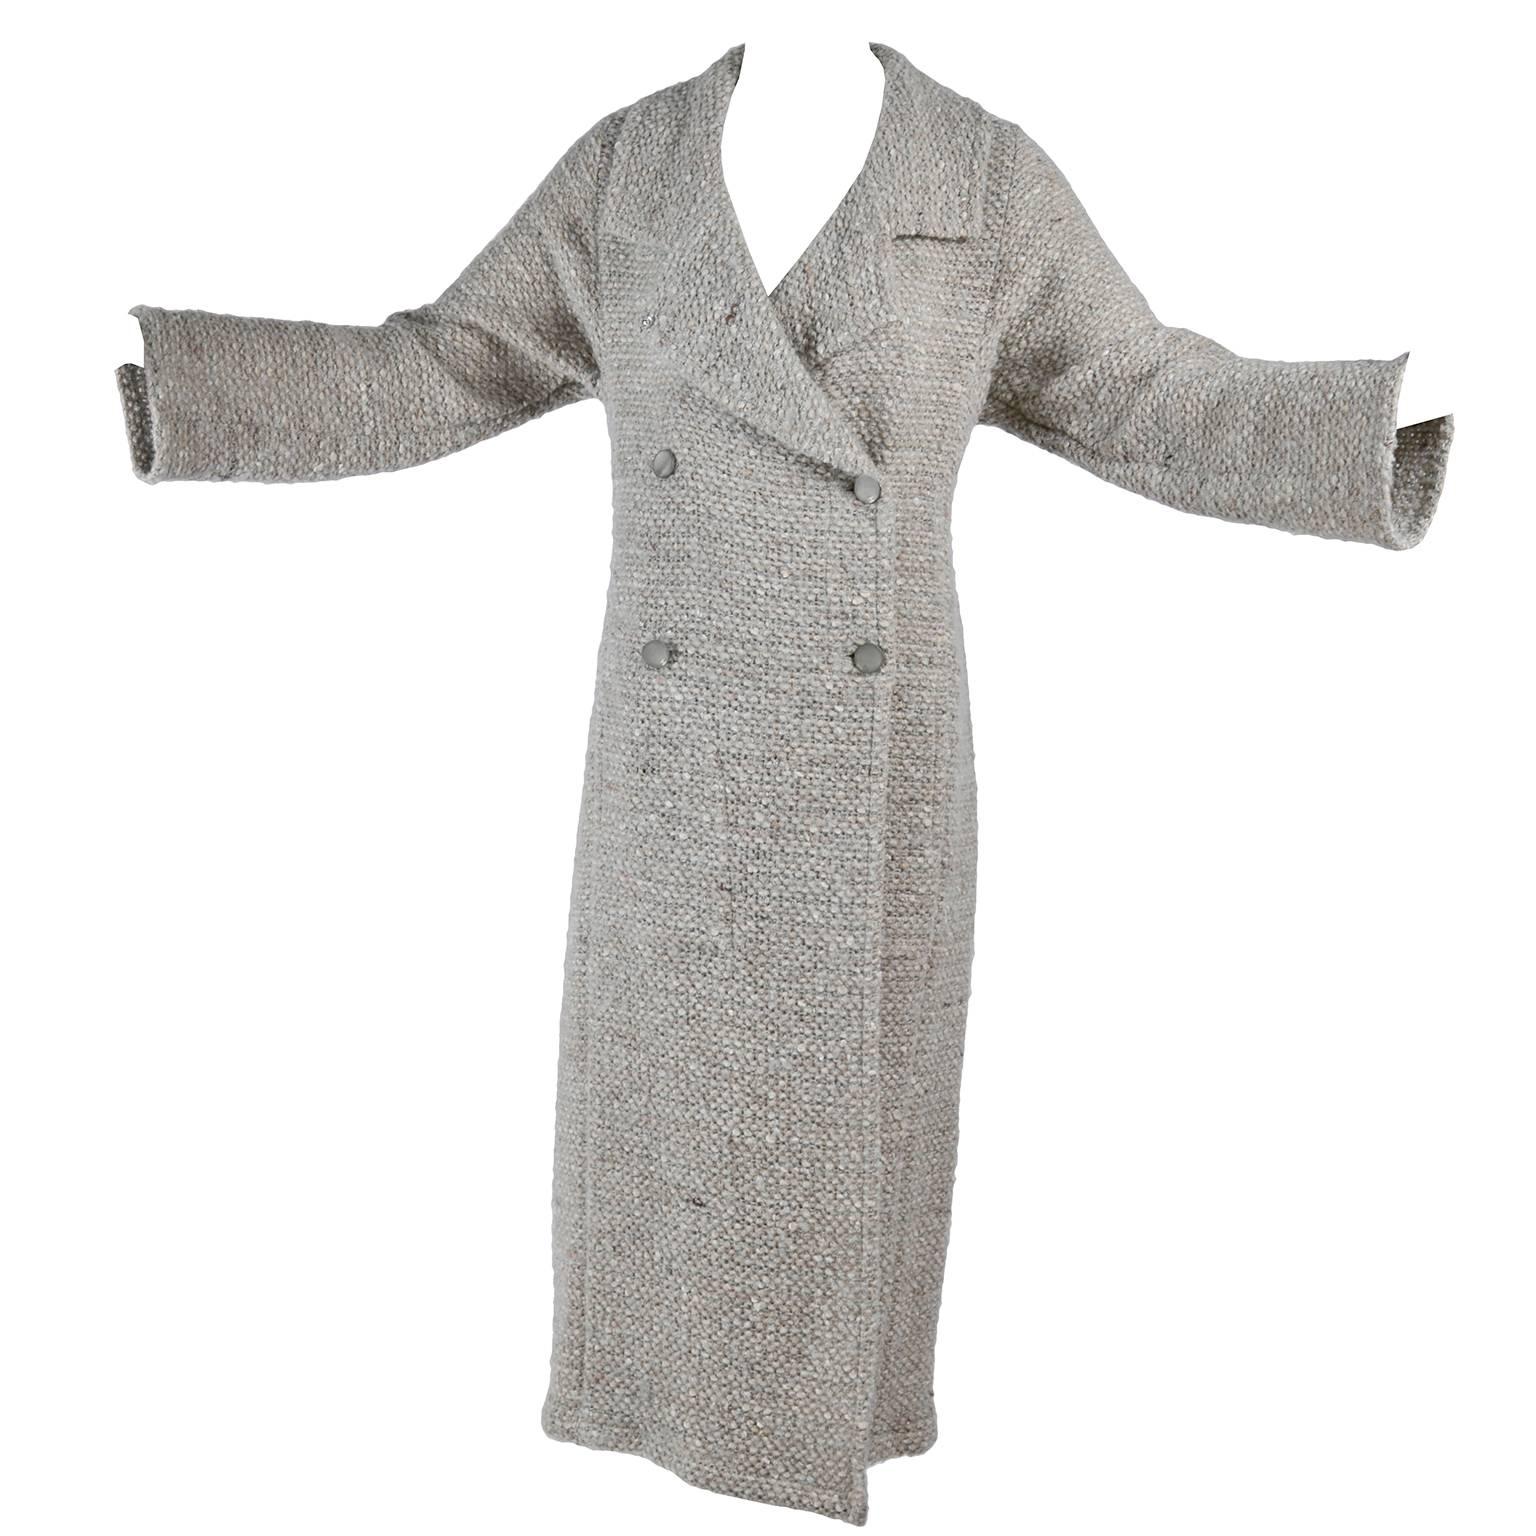 This lovely vintage Autumn 1999 Chanel Lesage fantasy tweed coat is in a Wool - Mohair blend and is labeled a French size 36. The coat is a beautiful cream, brown,ivory and soft blue and is comprised of 34% wool, 29% rayon, 19% mohair, 17% acrylic